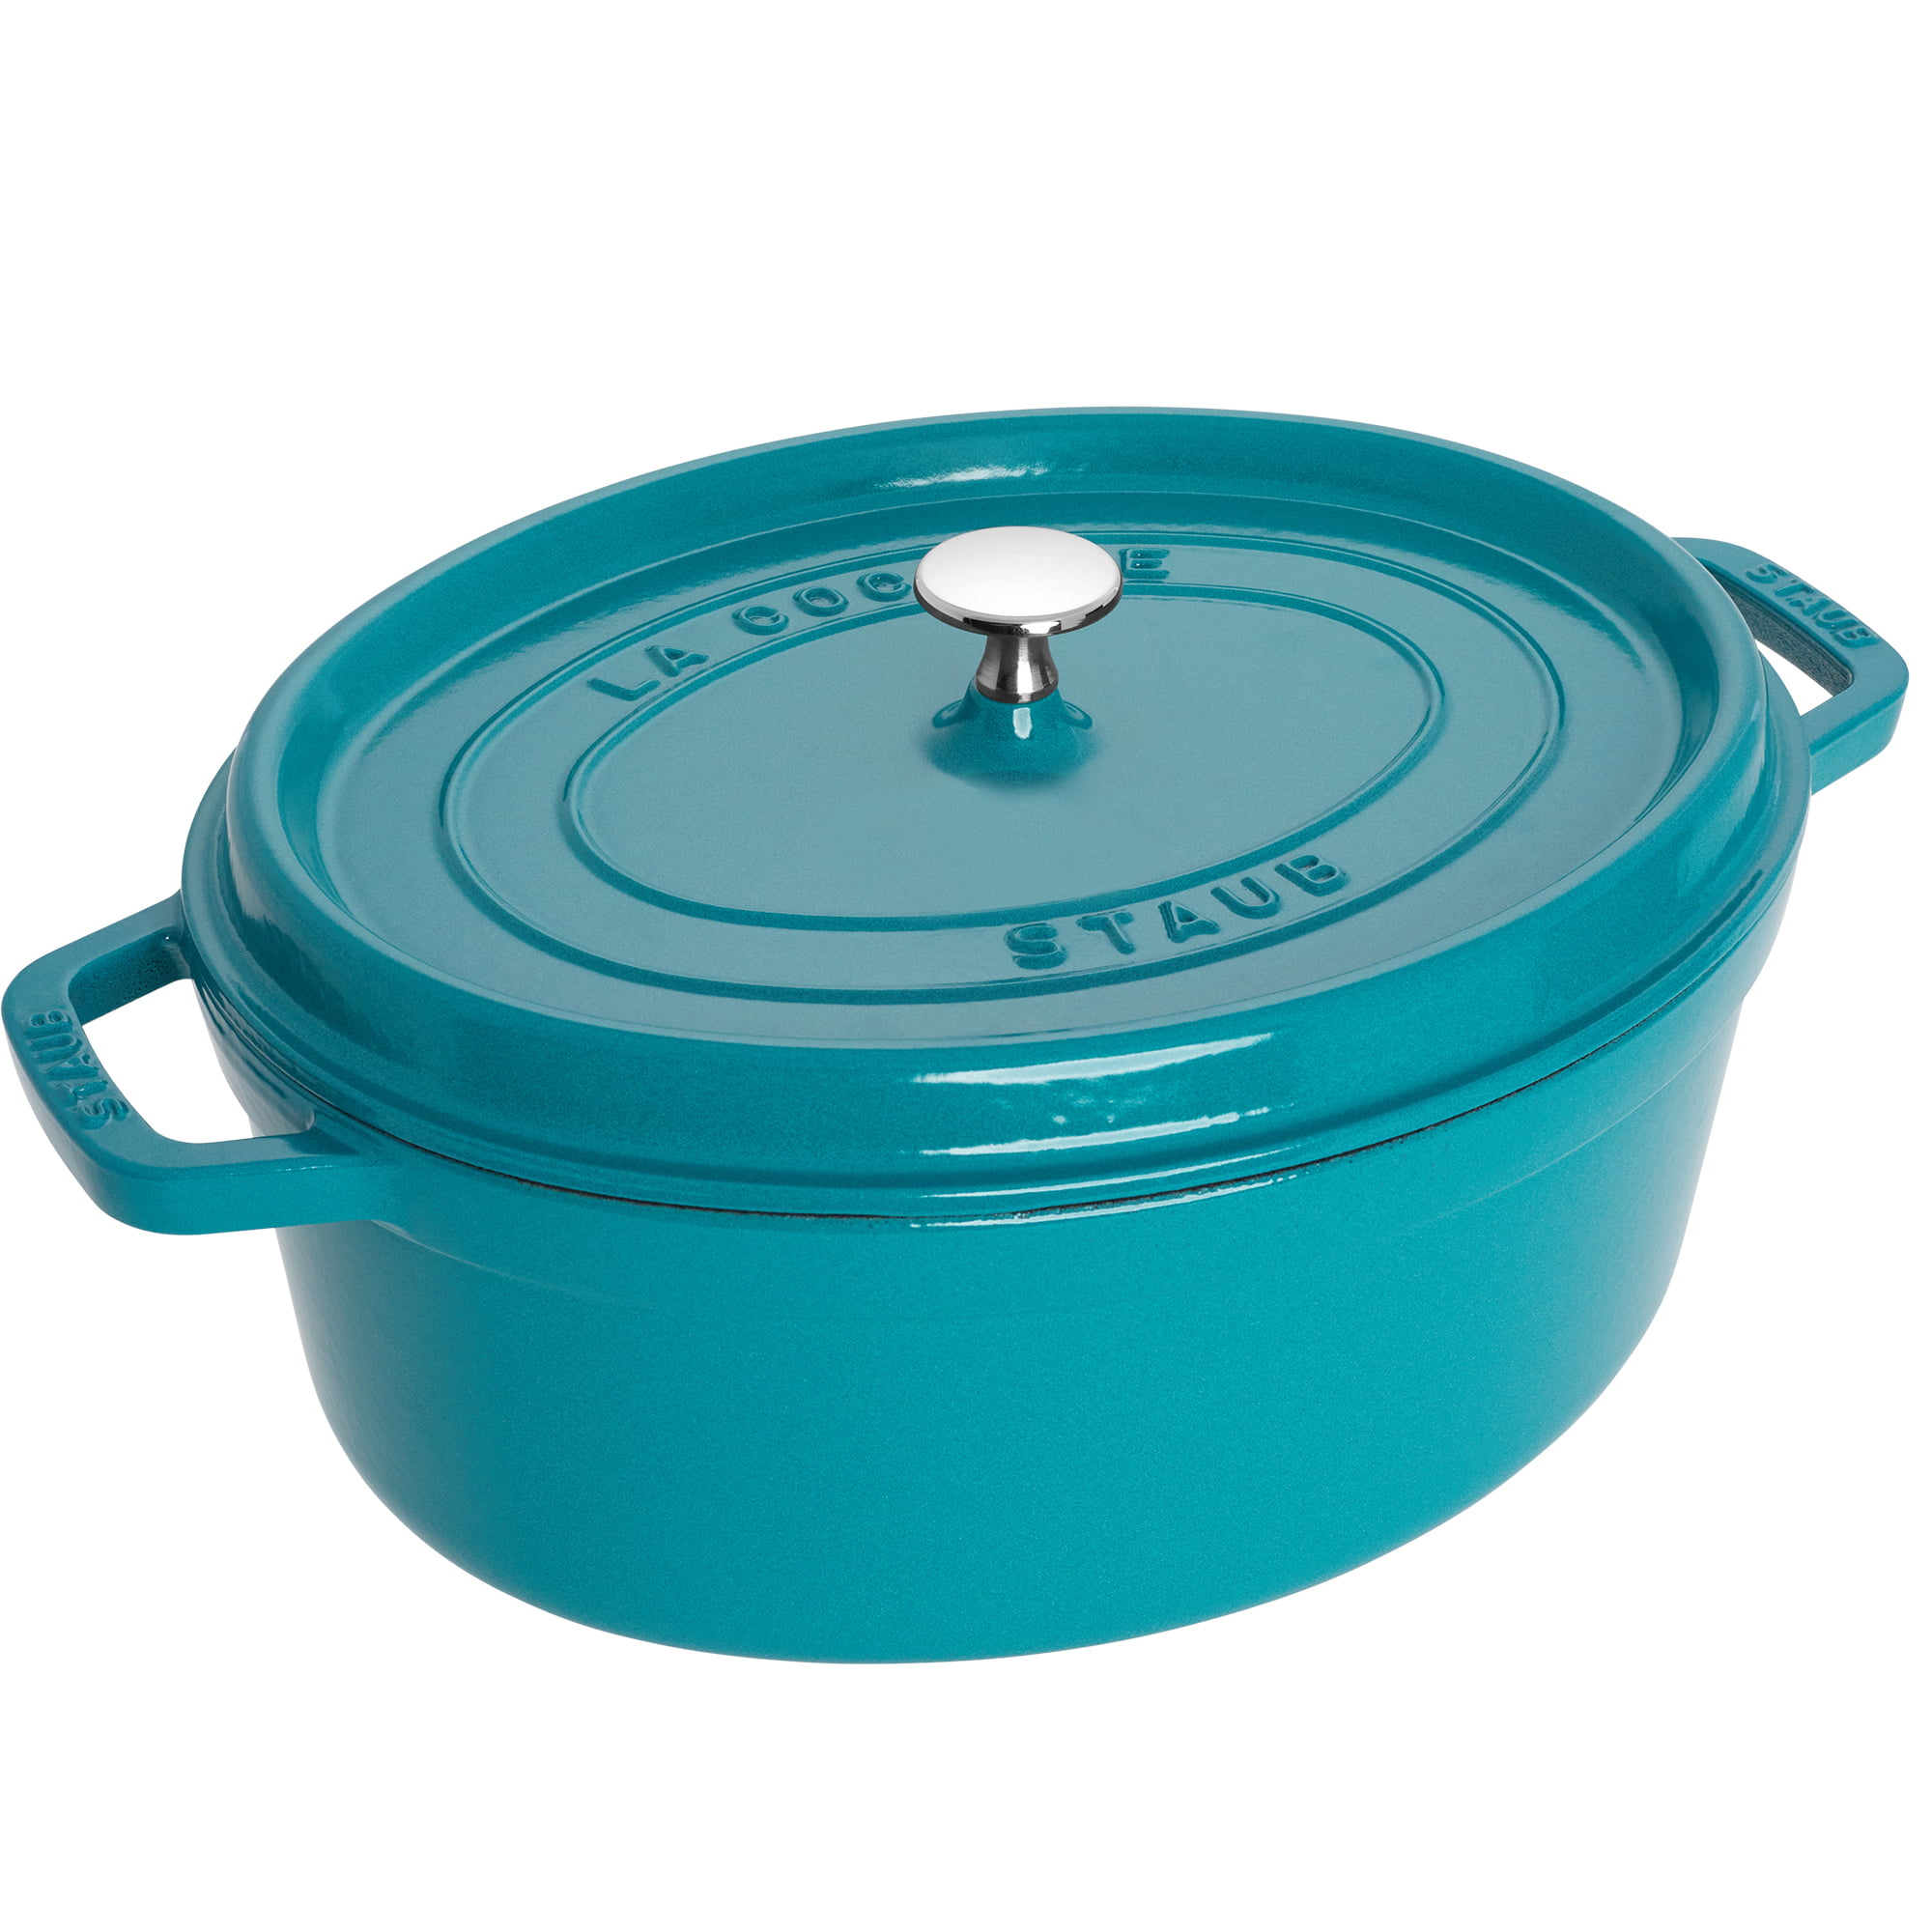 STAUB Cast Iron Dutch Oven 5.5-qt Round Cocotte, Made in France, Serves  5-6, Cherry